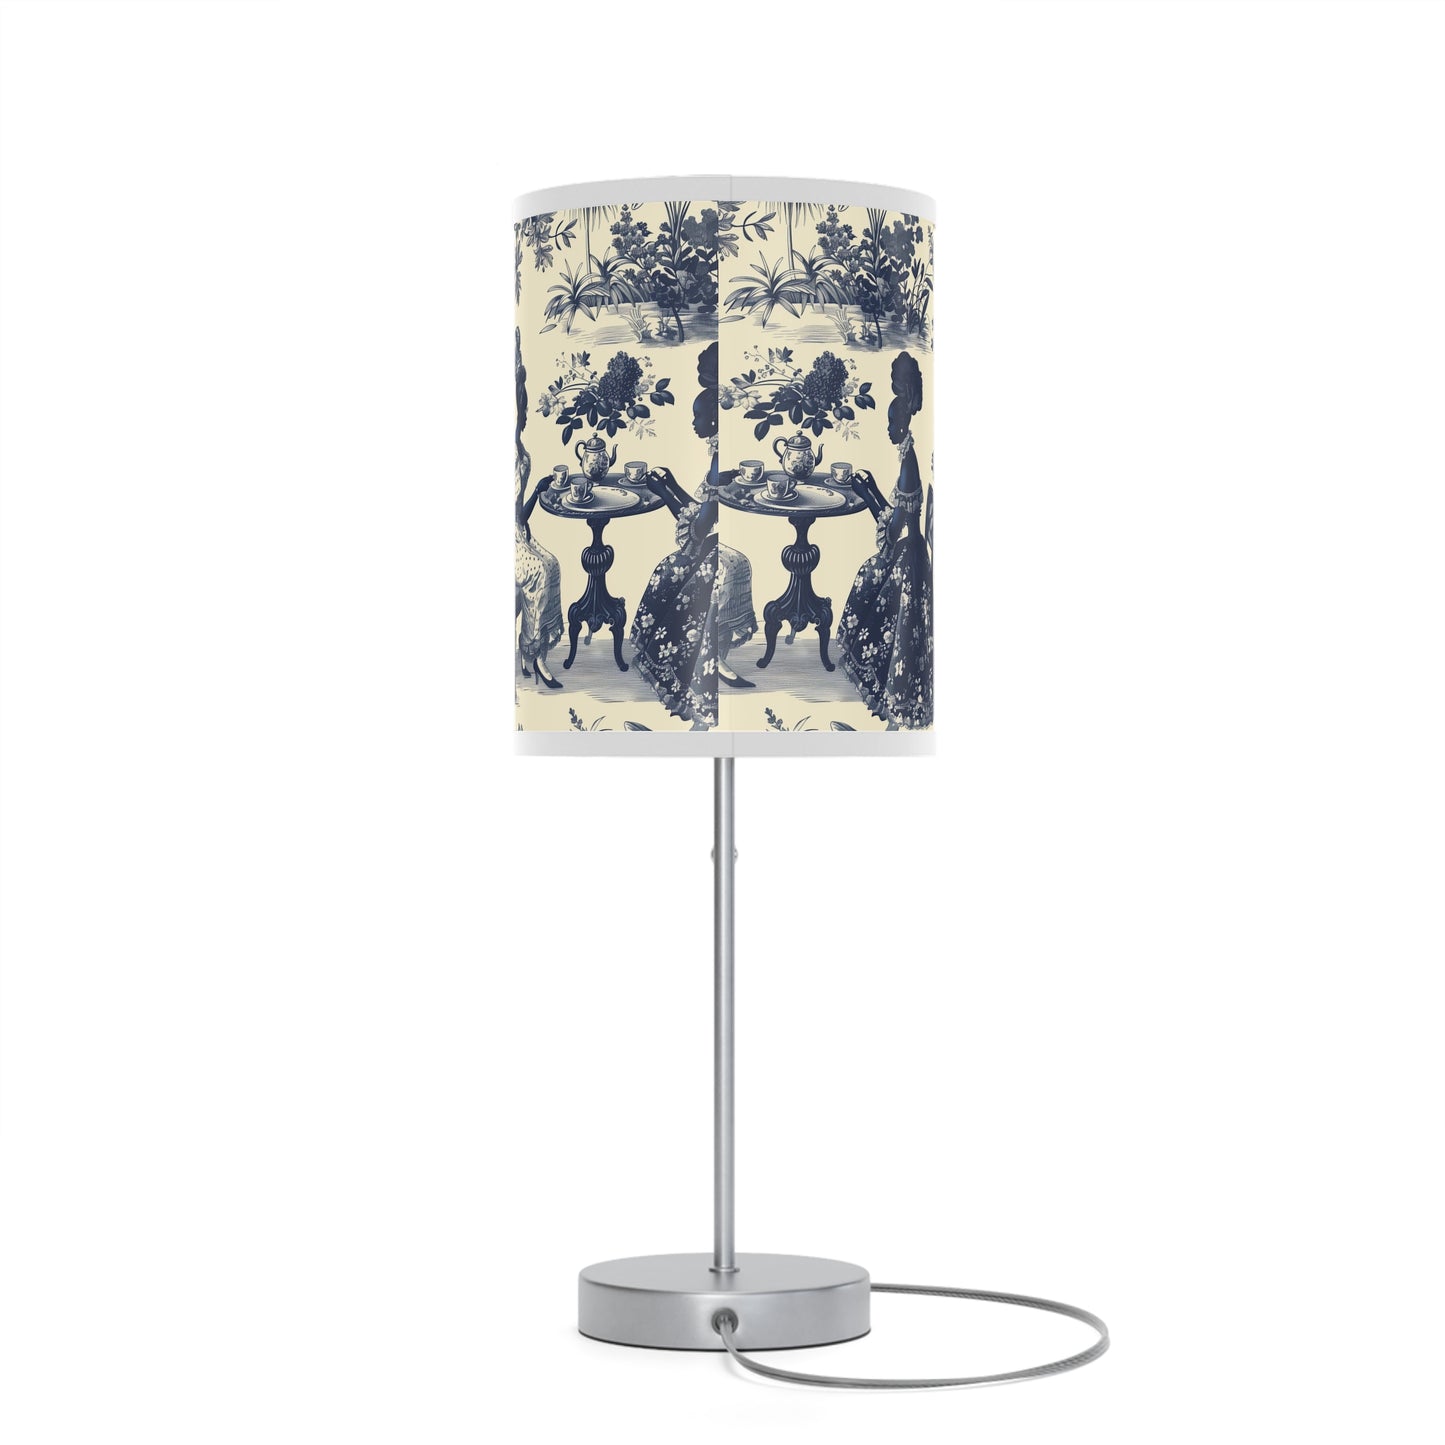 High Tea in the Garden Toile de Jouy Lamp on a Stand, US|CA plug